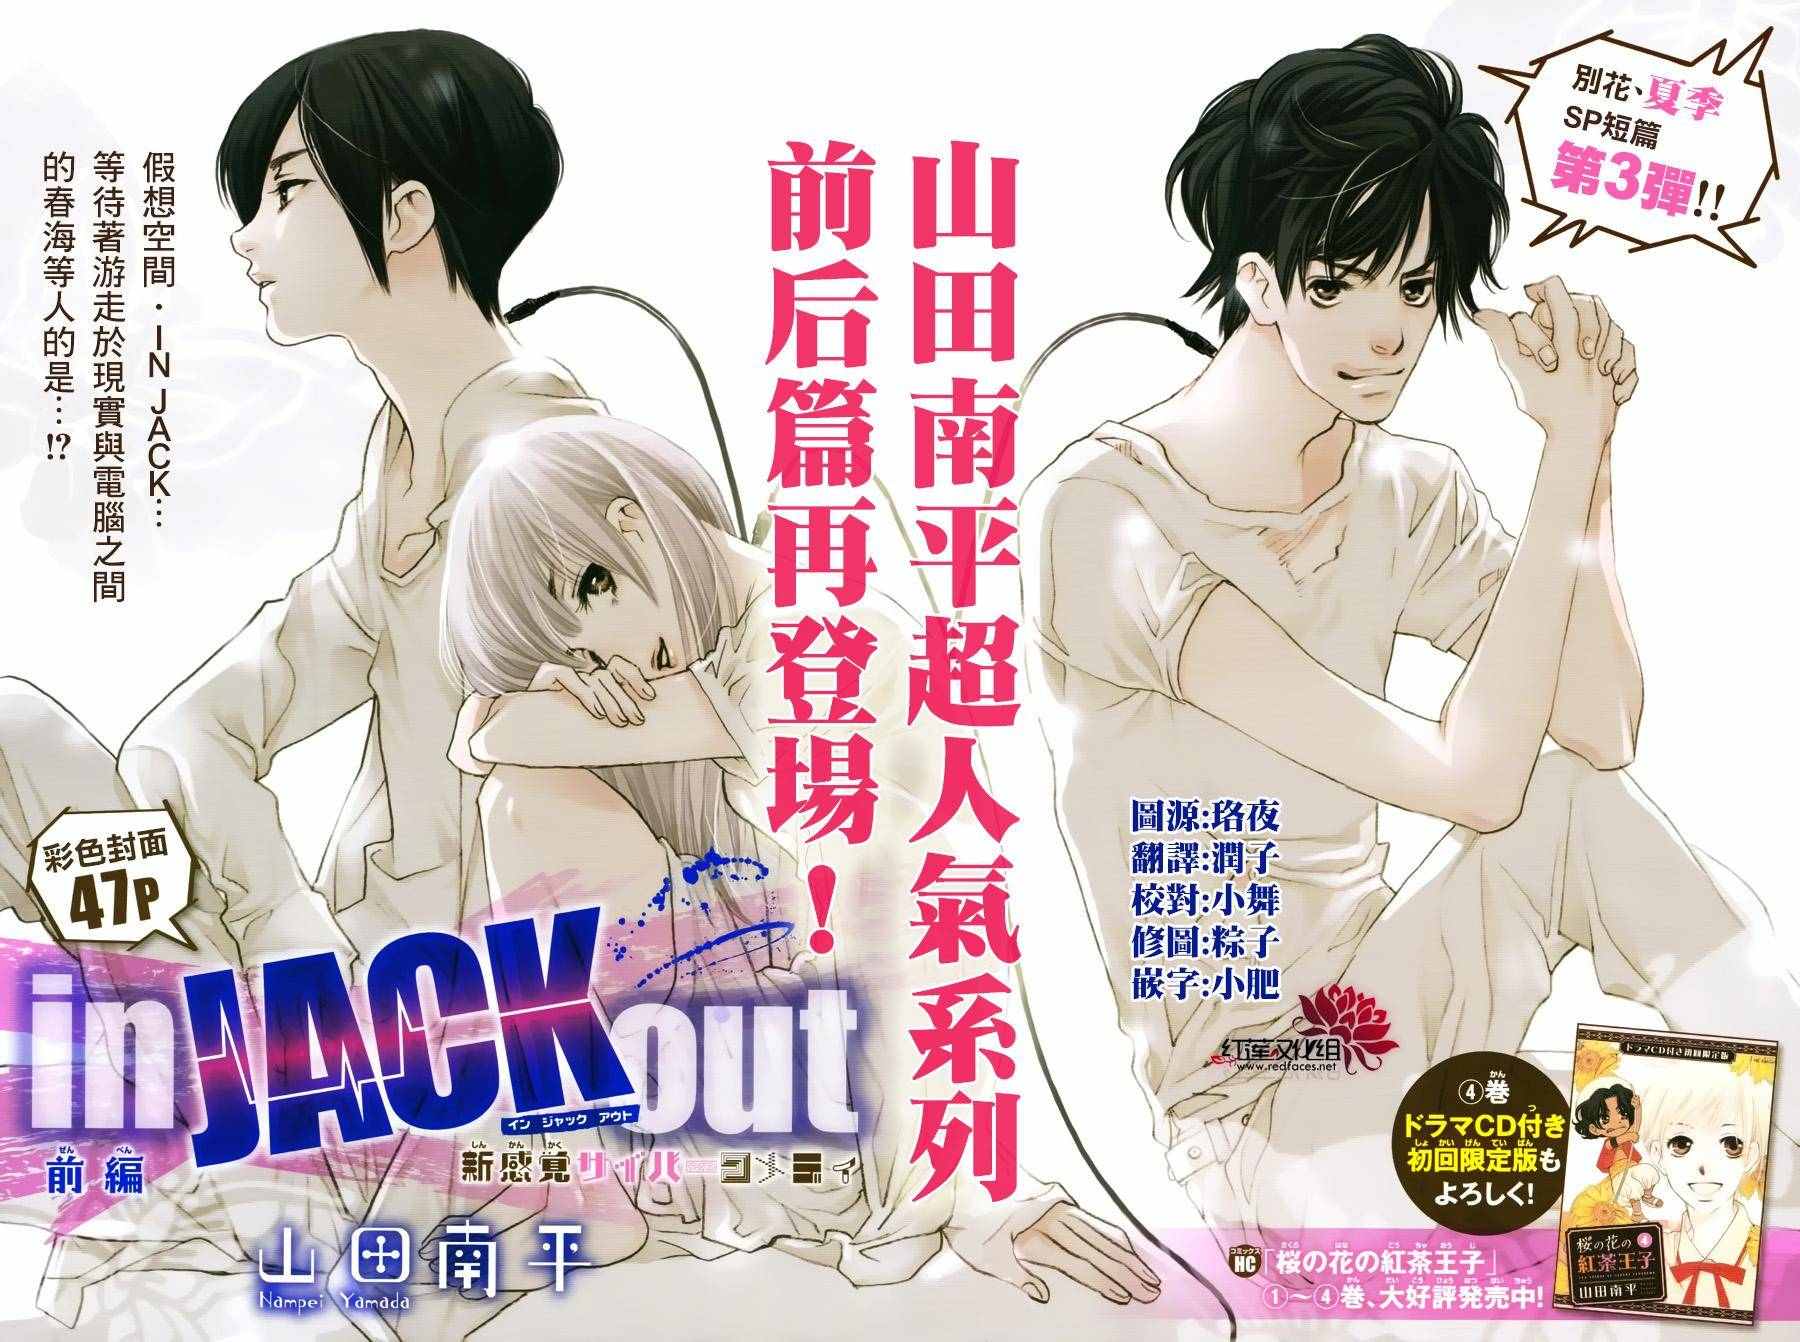 《in JACK out》漫画 前篇